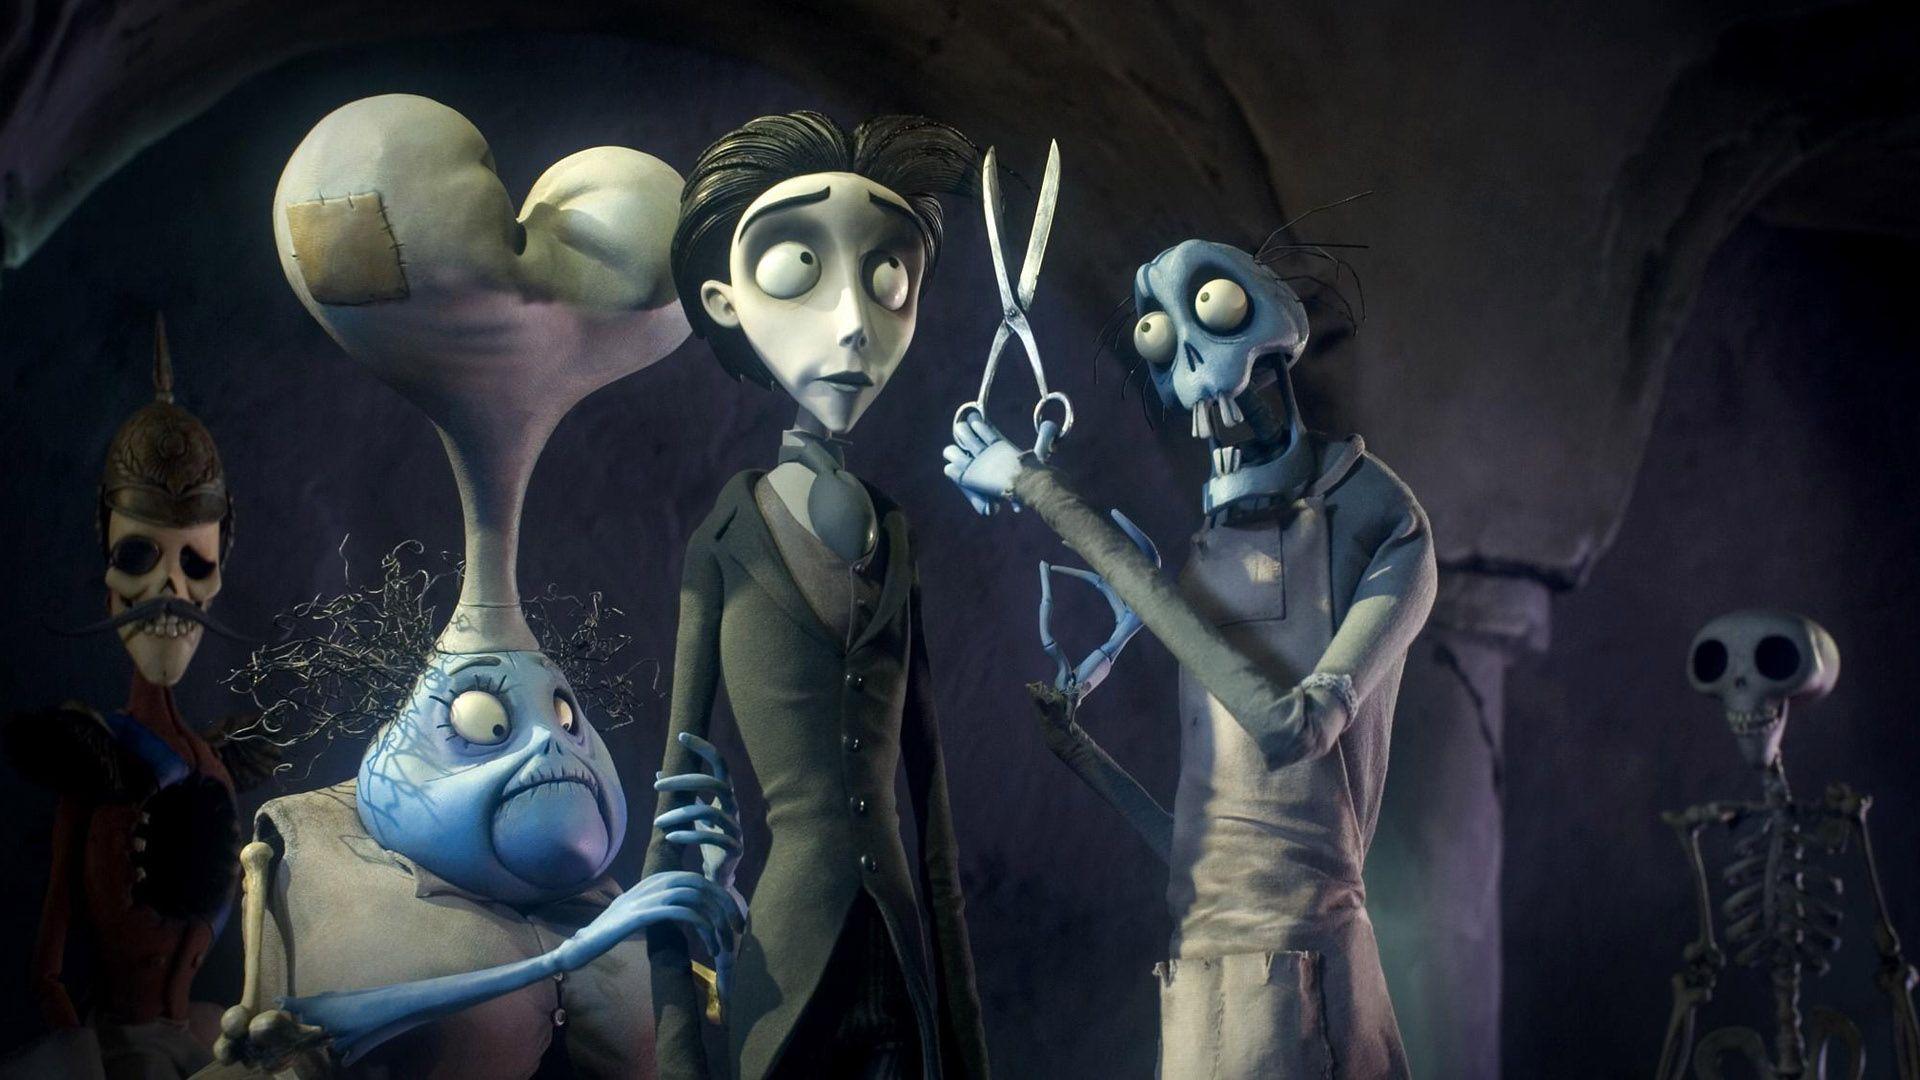 You will download Corpse Bride Wallpaper 1920x1080